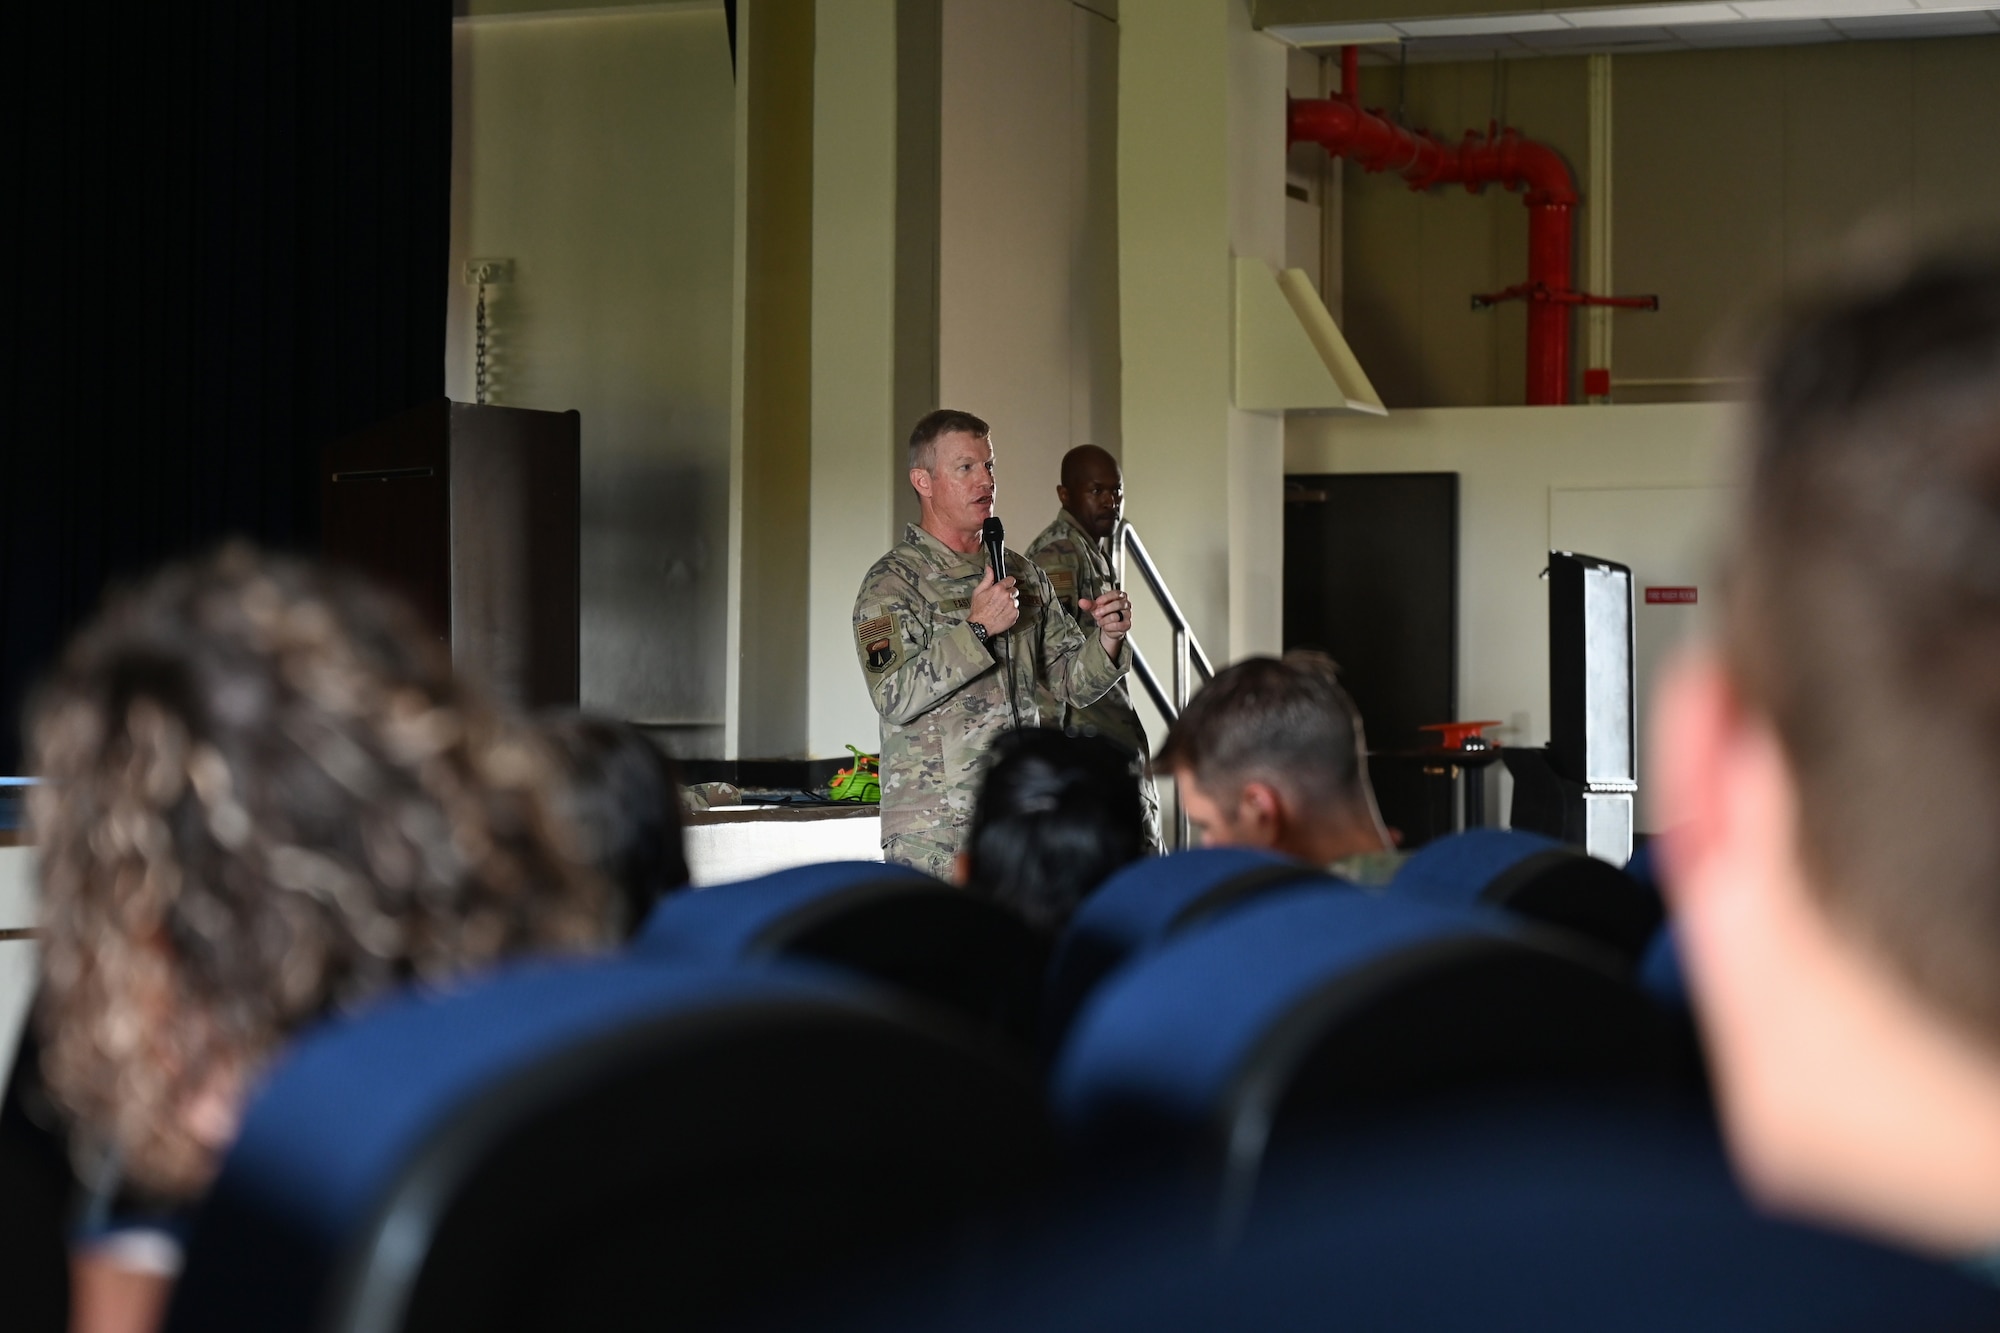 U.S. Air Force Brig. Gen. Paul Fast, 36th Wing commander, updates members of Team Andersen on current conditions during a town hall meeting about Super Typhoon Mawar at Andersen Air Force Base, Guam, May 29, 2023. Fast discussed recovery priorities on base and the recovery progress since the storm. (U.S. Air Force photo by Senior Airman Kaitlyn Preston)